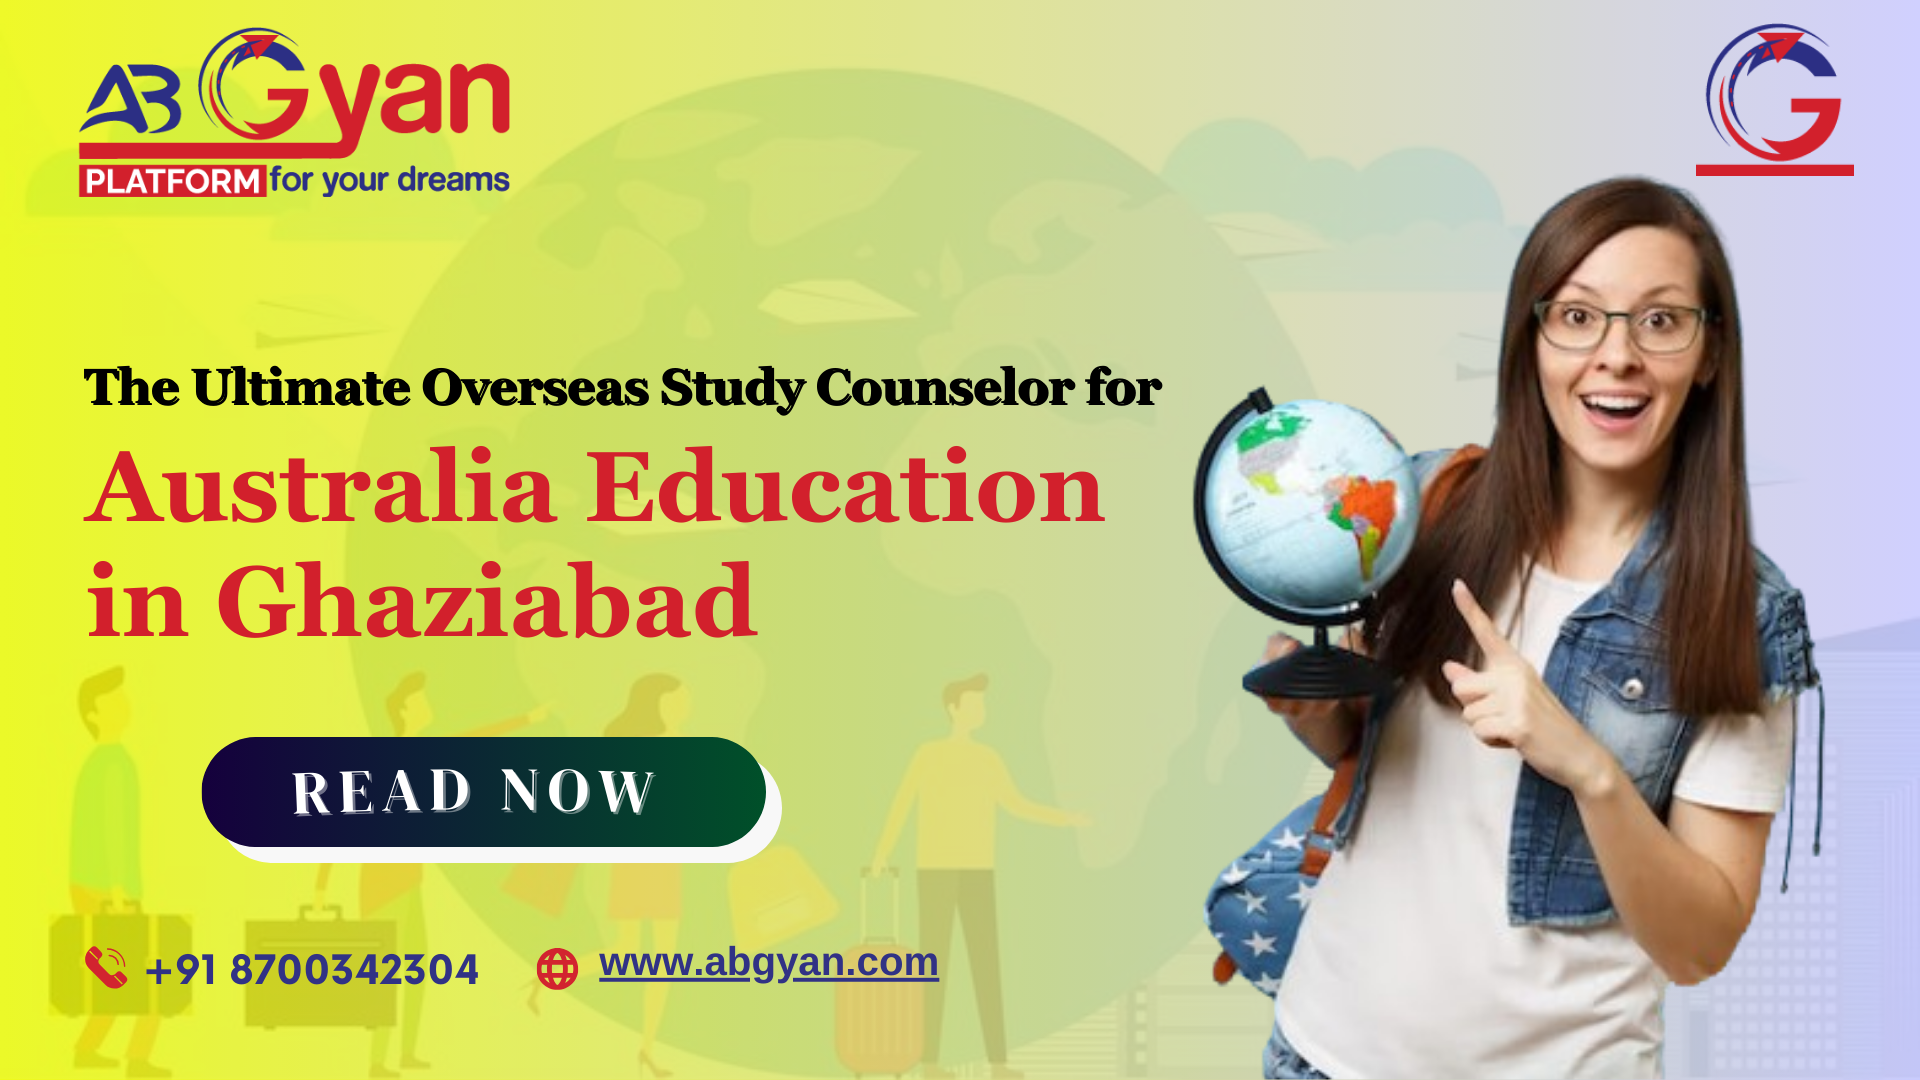 The Ultimate Overseas Study Counselor for Australia Education in Ghaziabad -